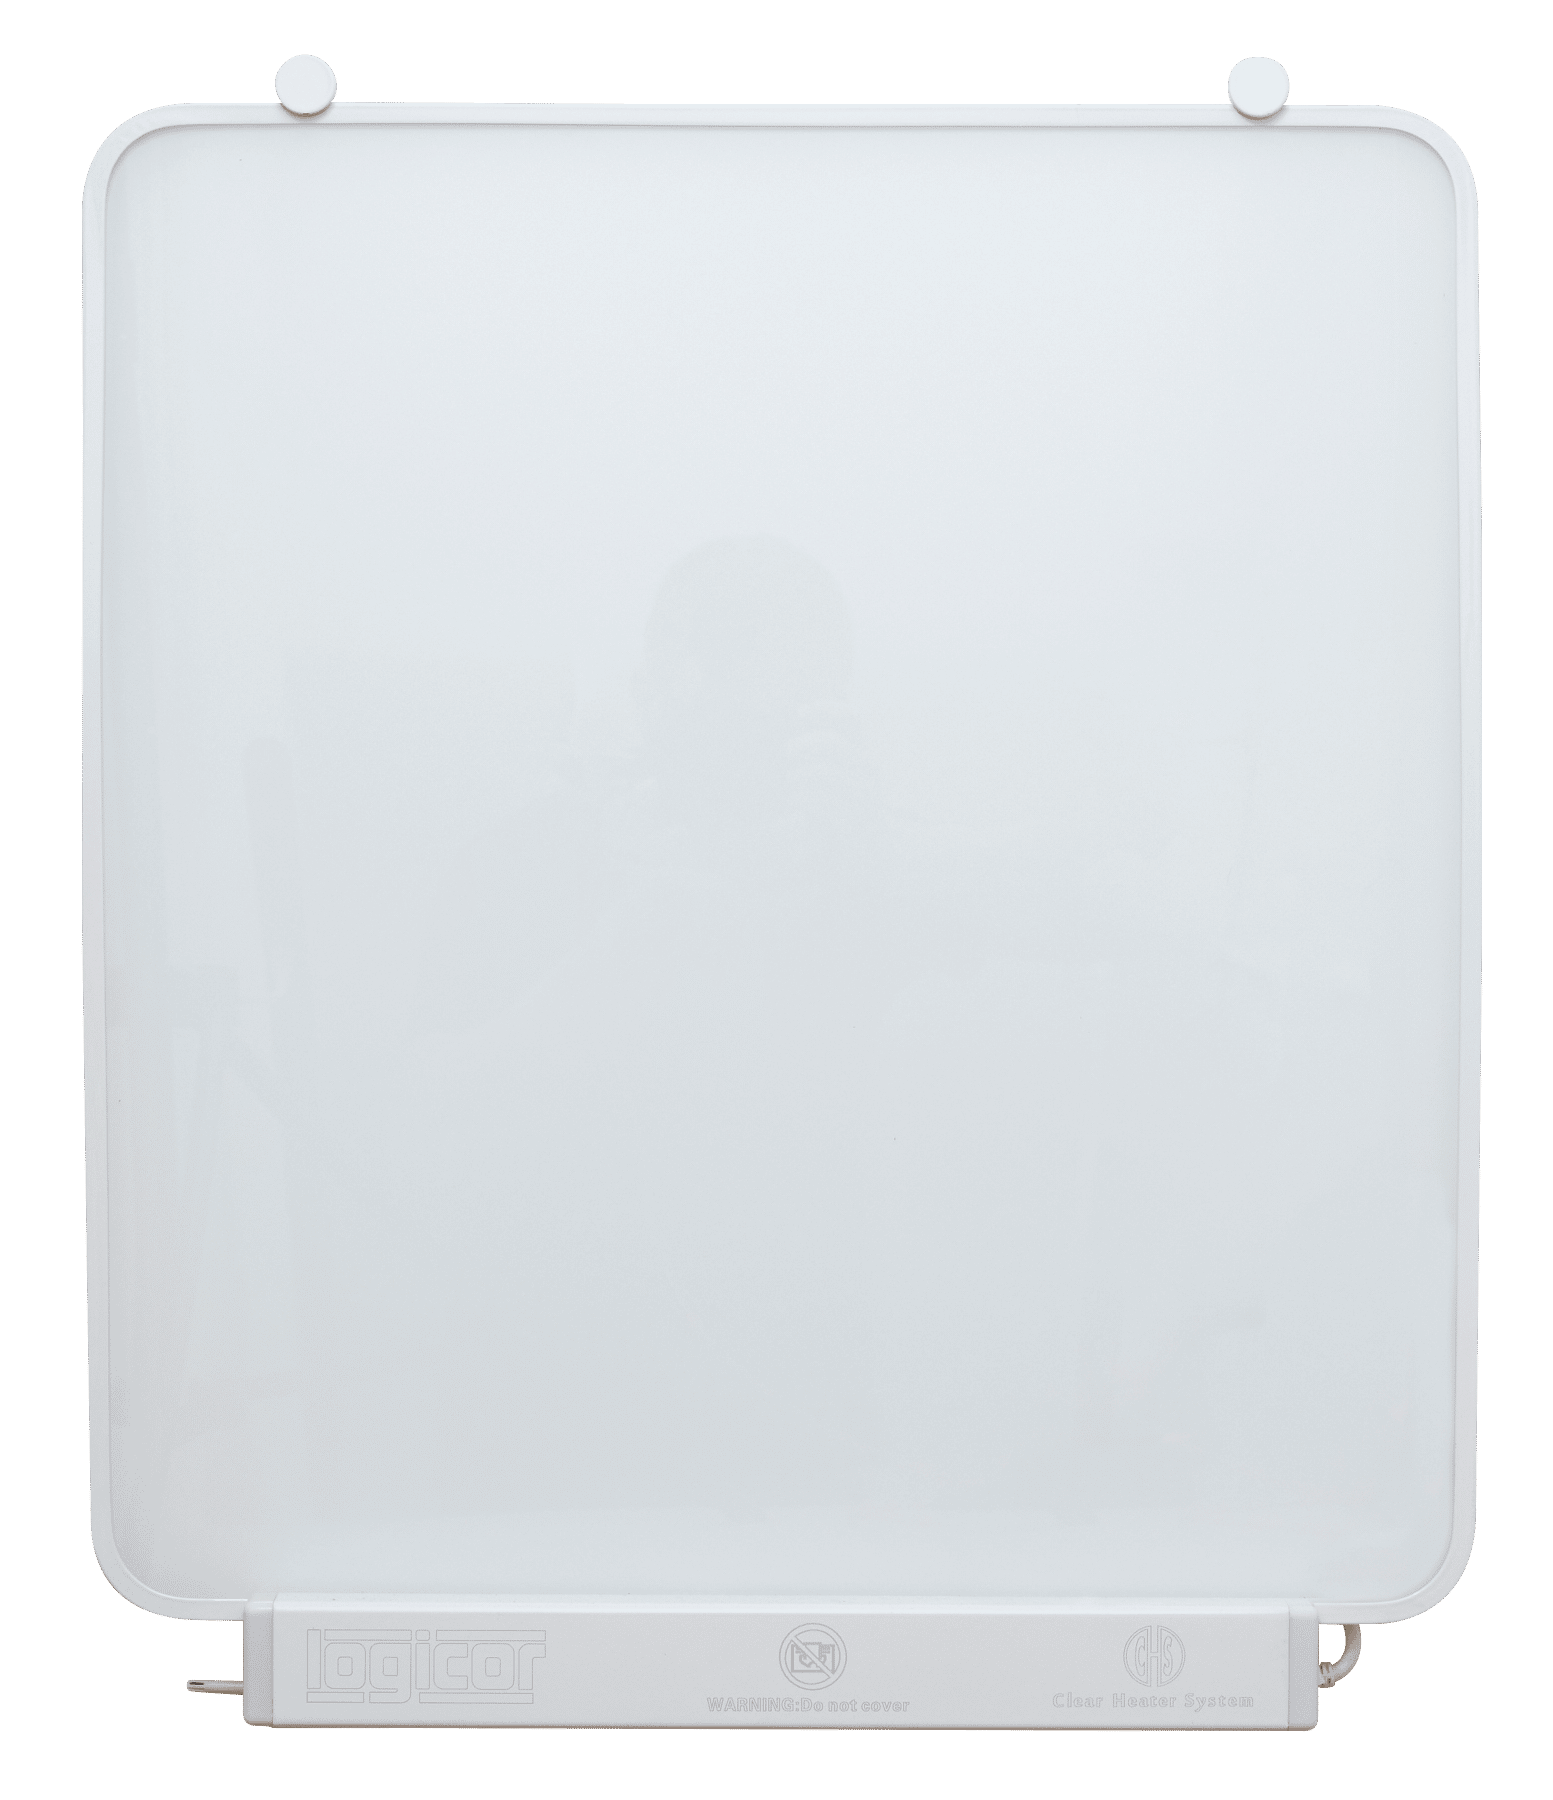 Ambion Small Heating Panel Example